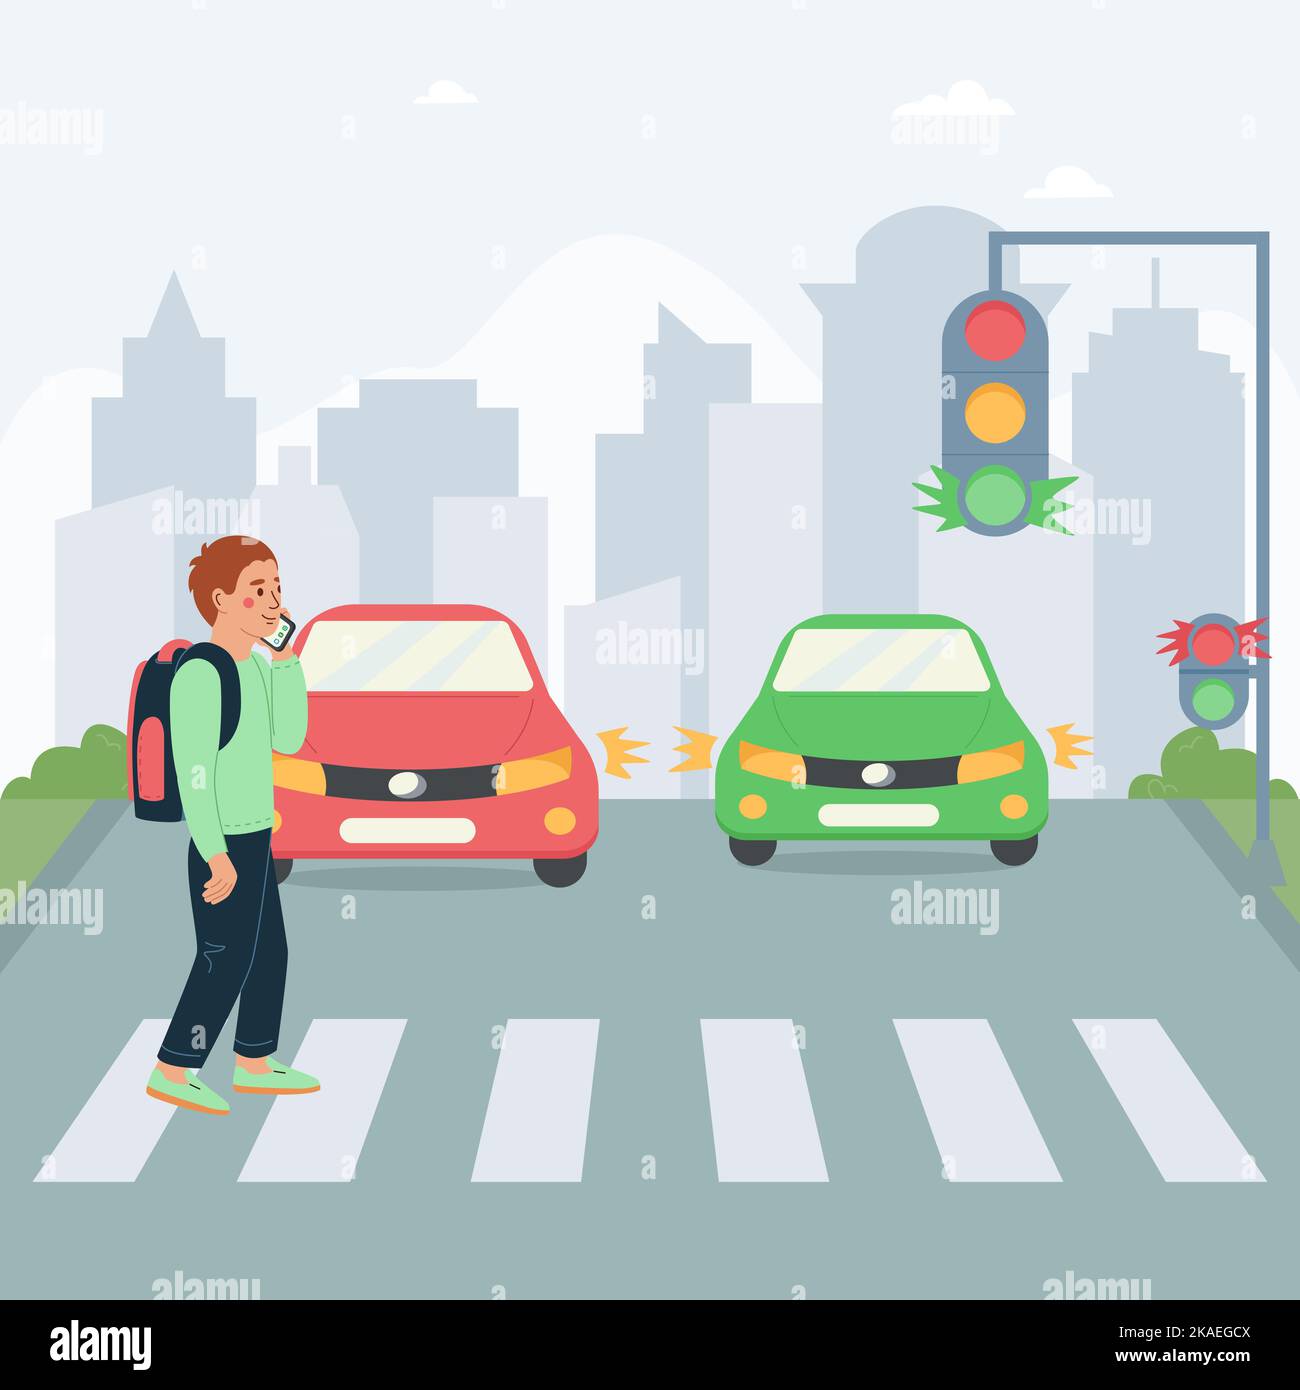 Children safety flat poster with schoolboy crossing street at red traffic light and talking on phone vector illustration Stock Vector